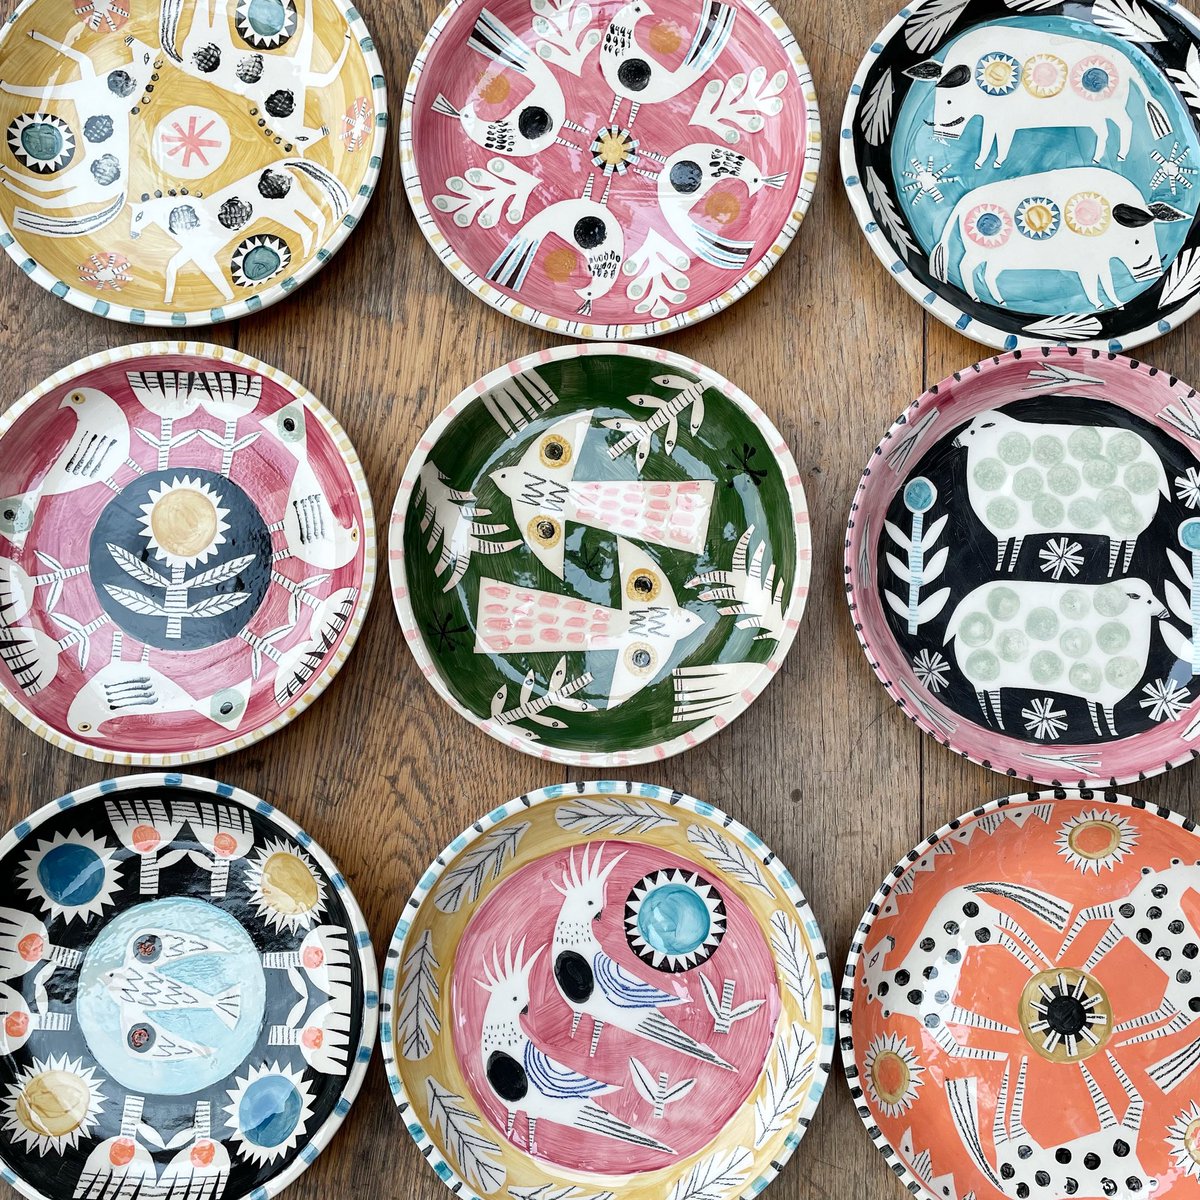 I will be listing all these hand painted earthenware plates on my website at the end of the week ! #ceramics #handbuilt #handdecorated